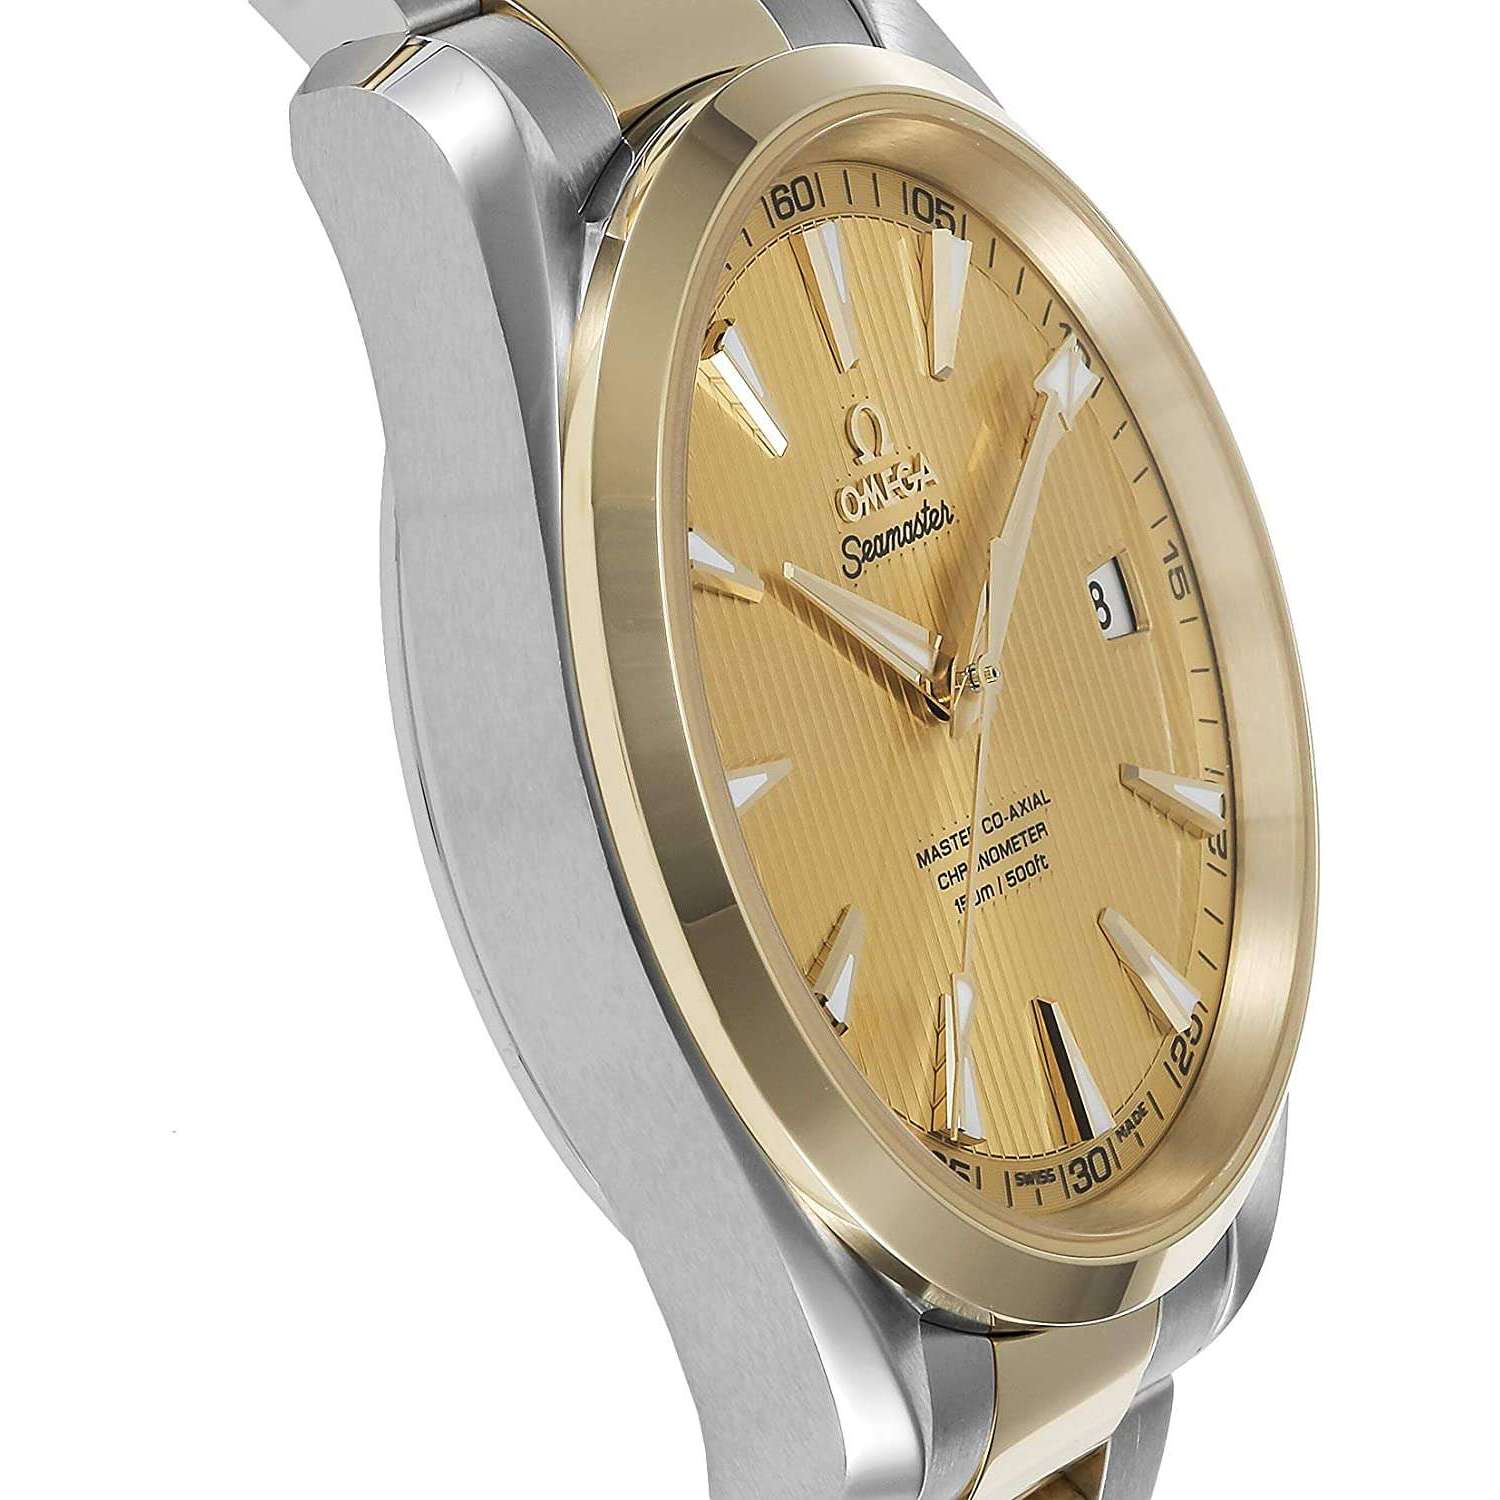 OMEGA SEAMASTER MASTER CO-AXIAL CHRONOMETER 42 MM MEN WATCH 231.20.42.21.08.001 - ROOK JAPAN